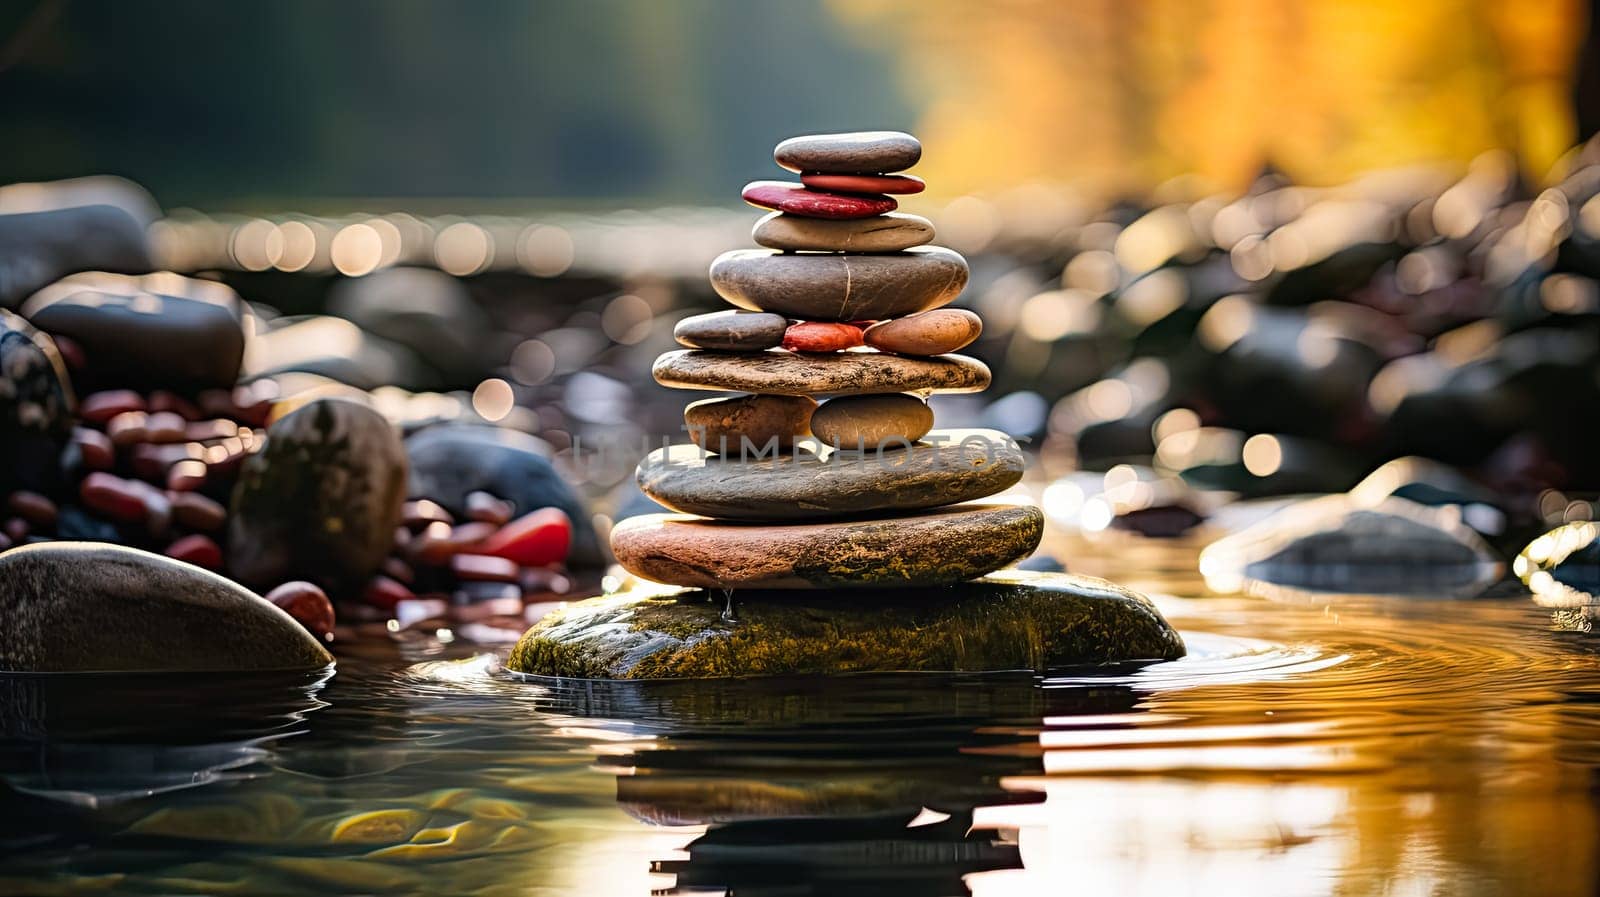 Experience the art of balance with rocks delicately stacked atop one another on moss covered stones. by Alla_Morozova93